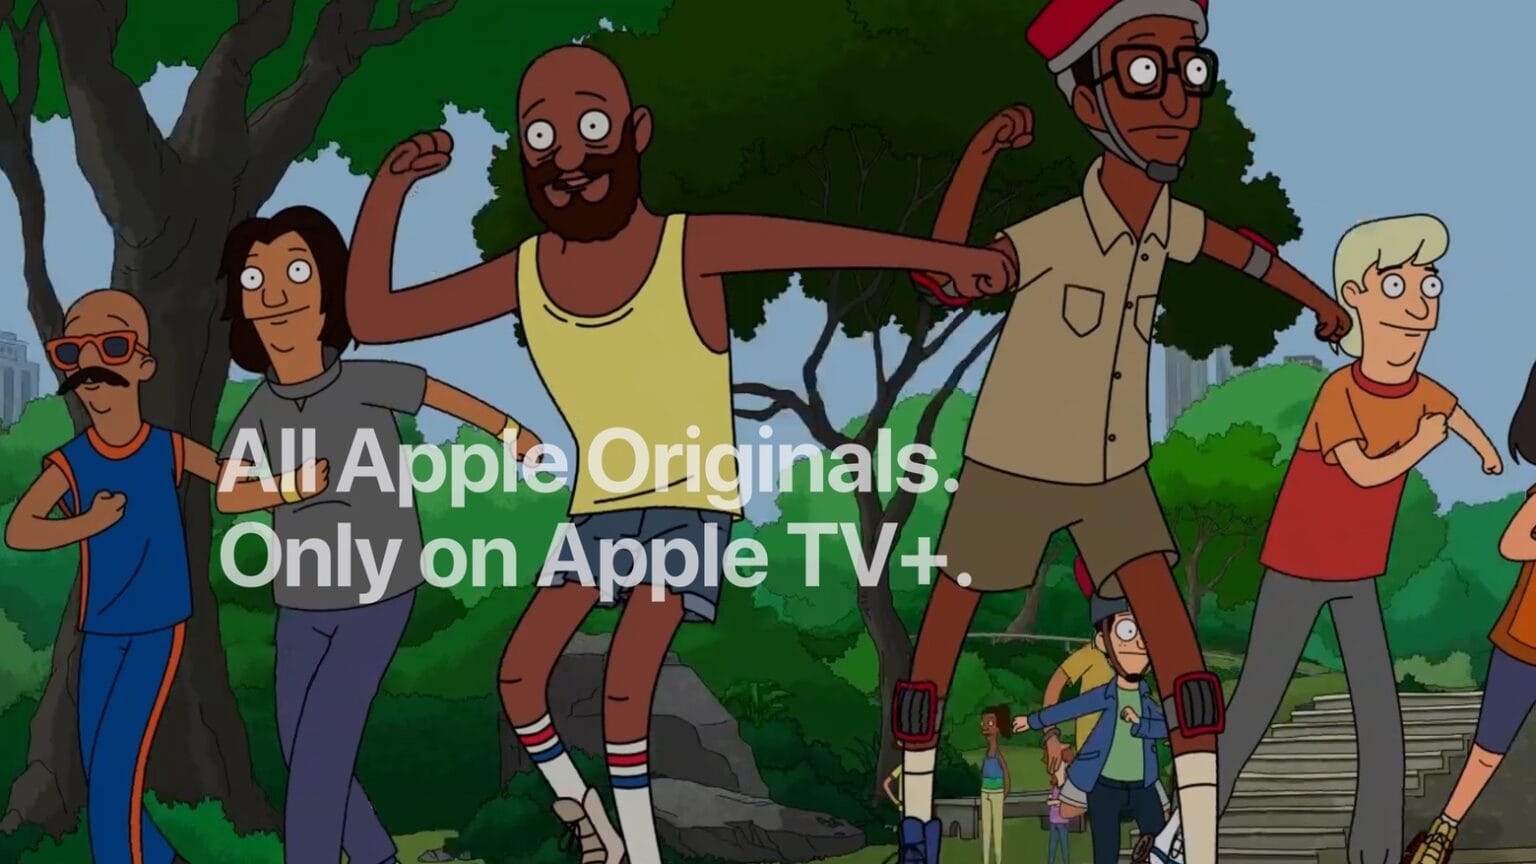 Apple TV+ has yet to cut into the lead of well-established streaming video services.